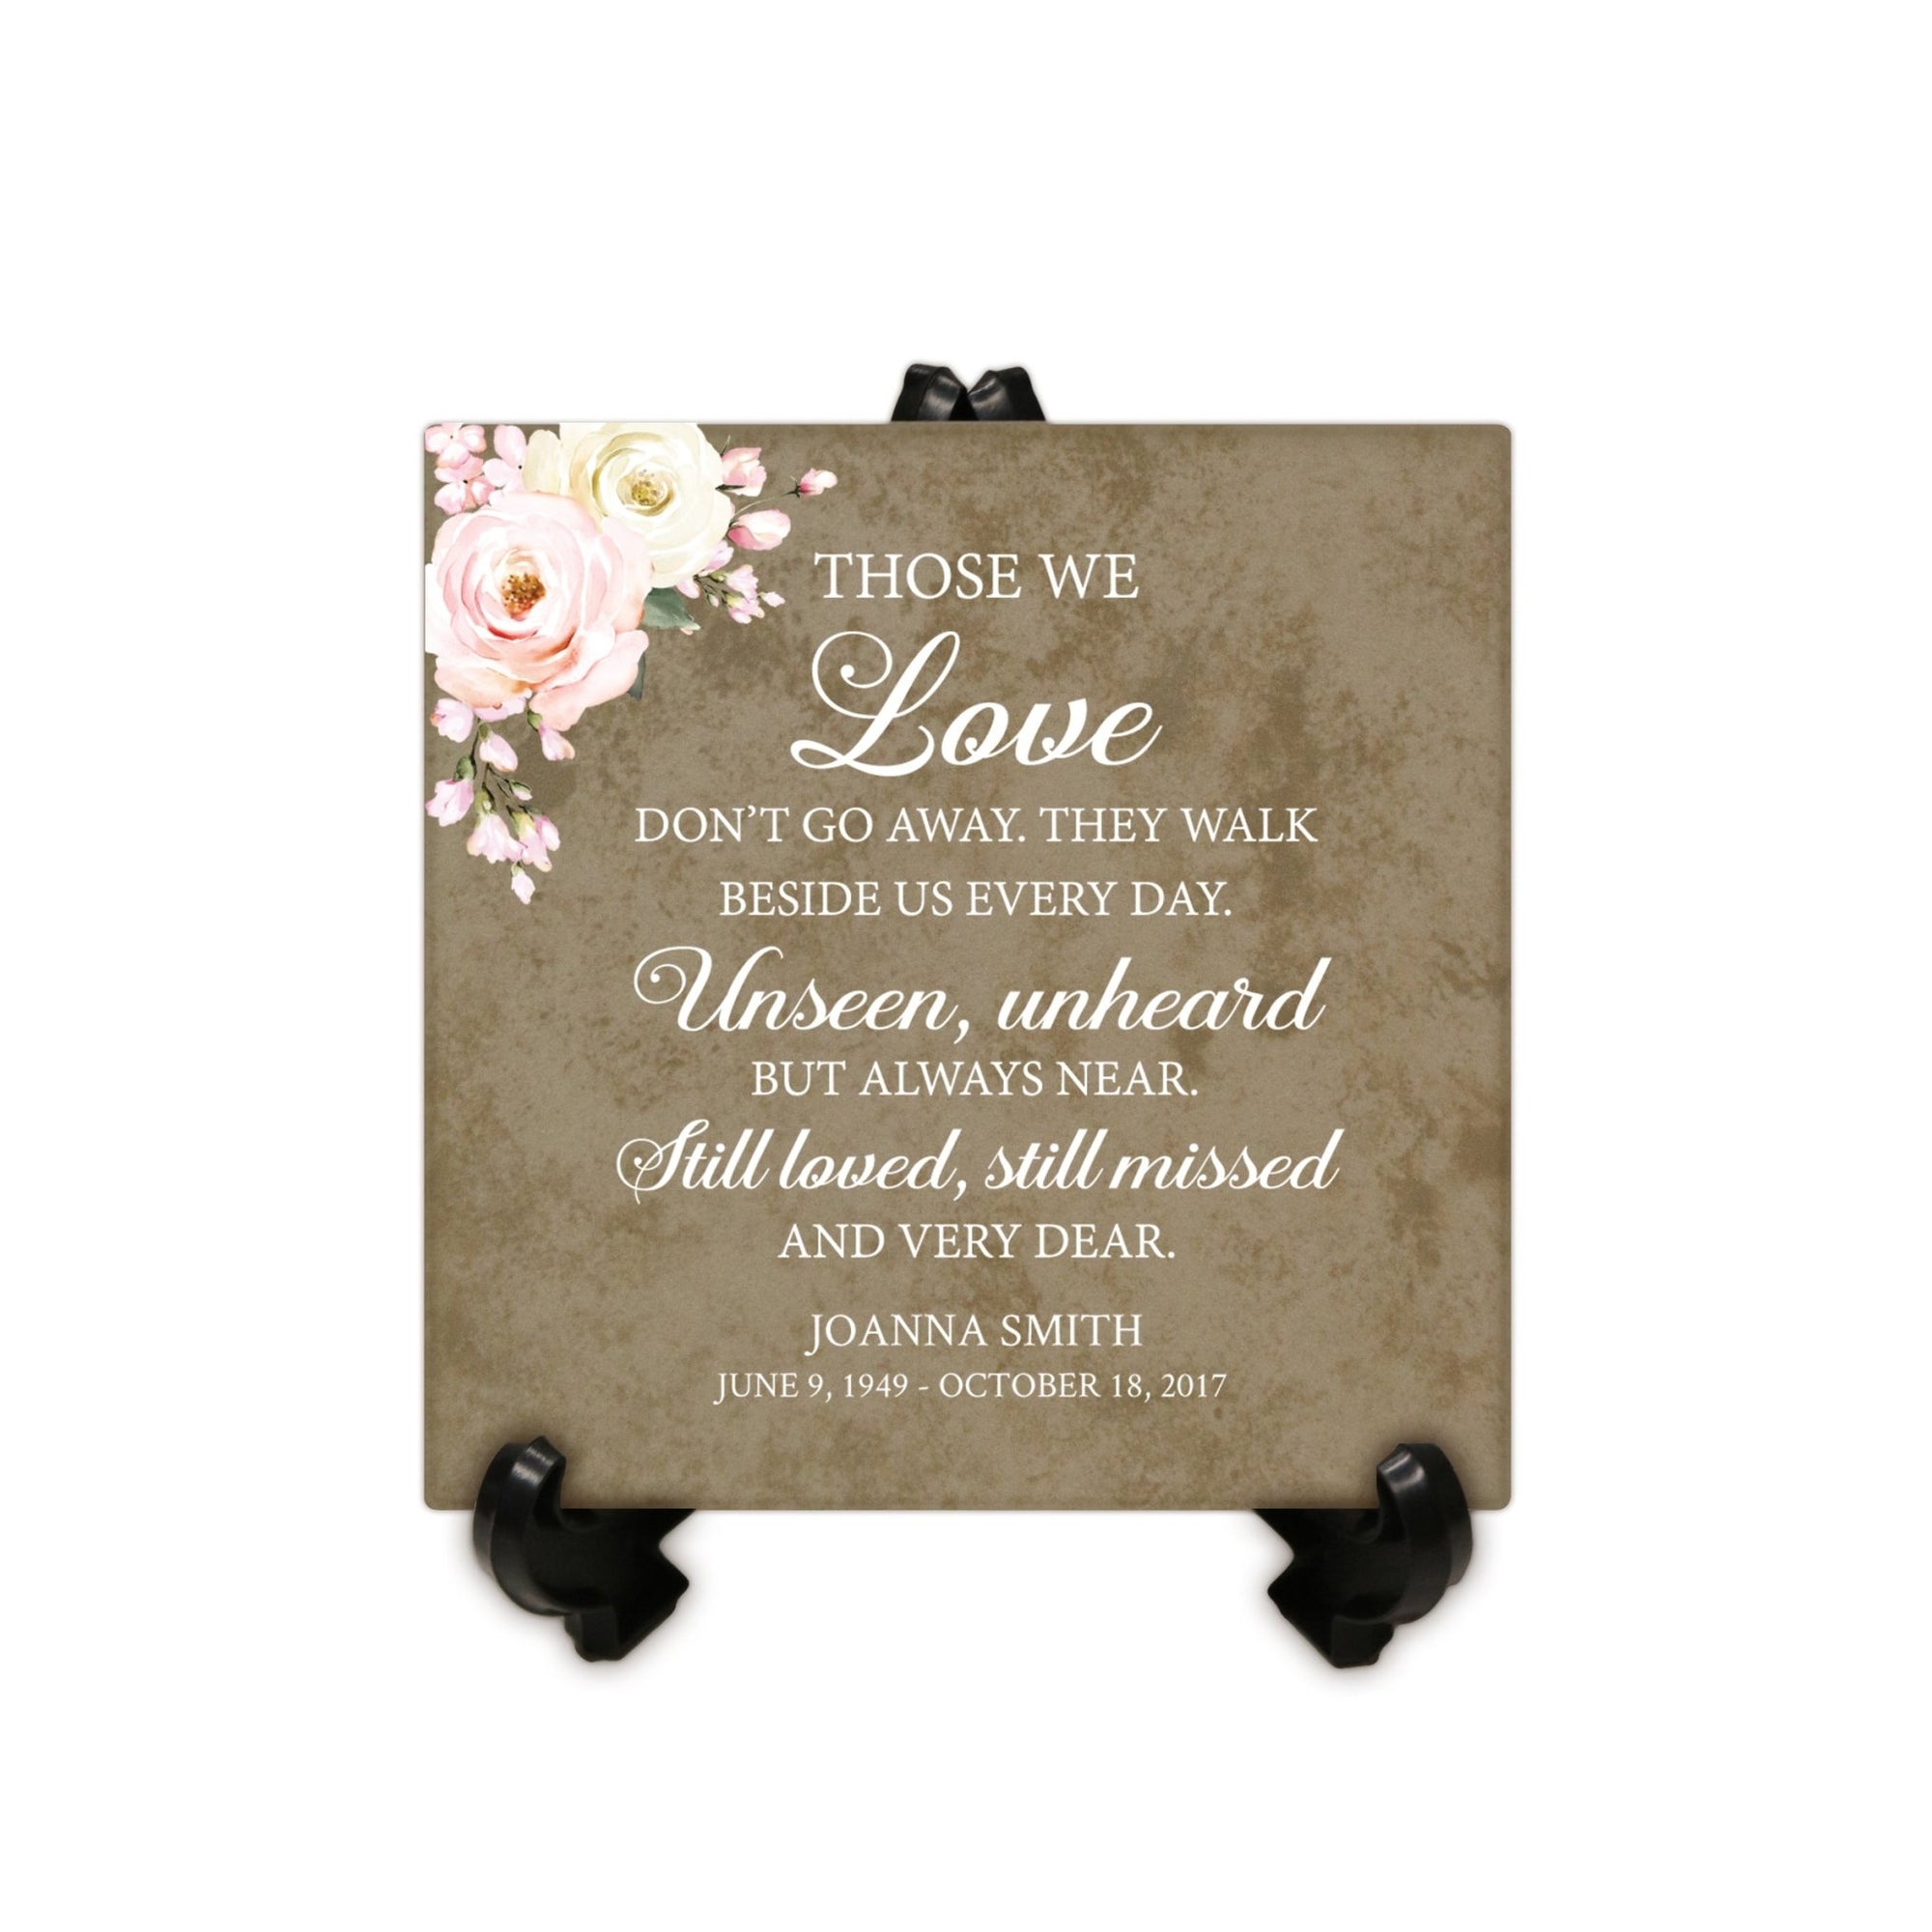 Personalized Memorial Ceramic Trivet with Stand for Home Decor - Those We Love Don't Go - LifeSong Milestones